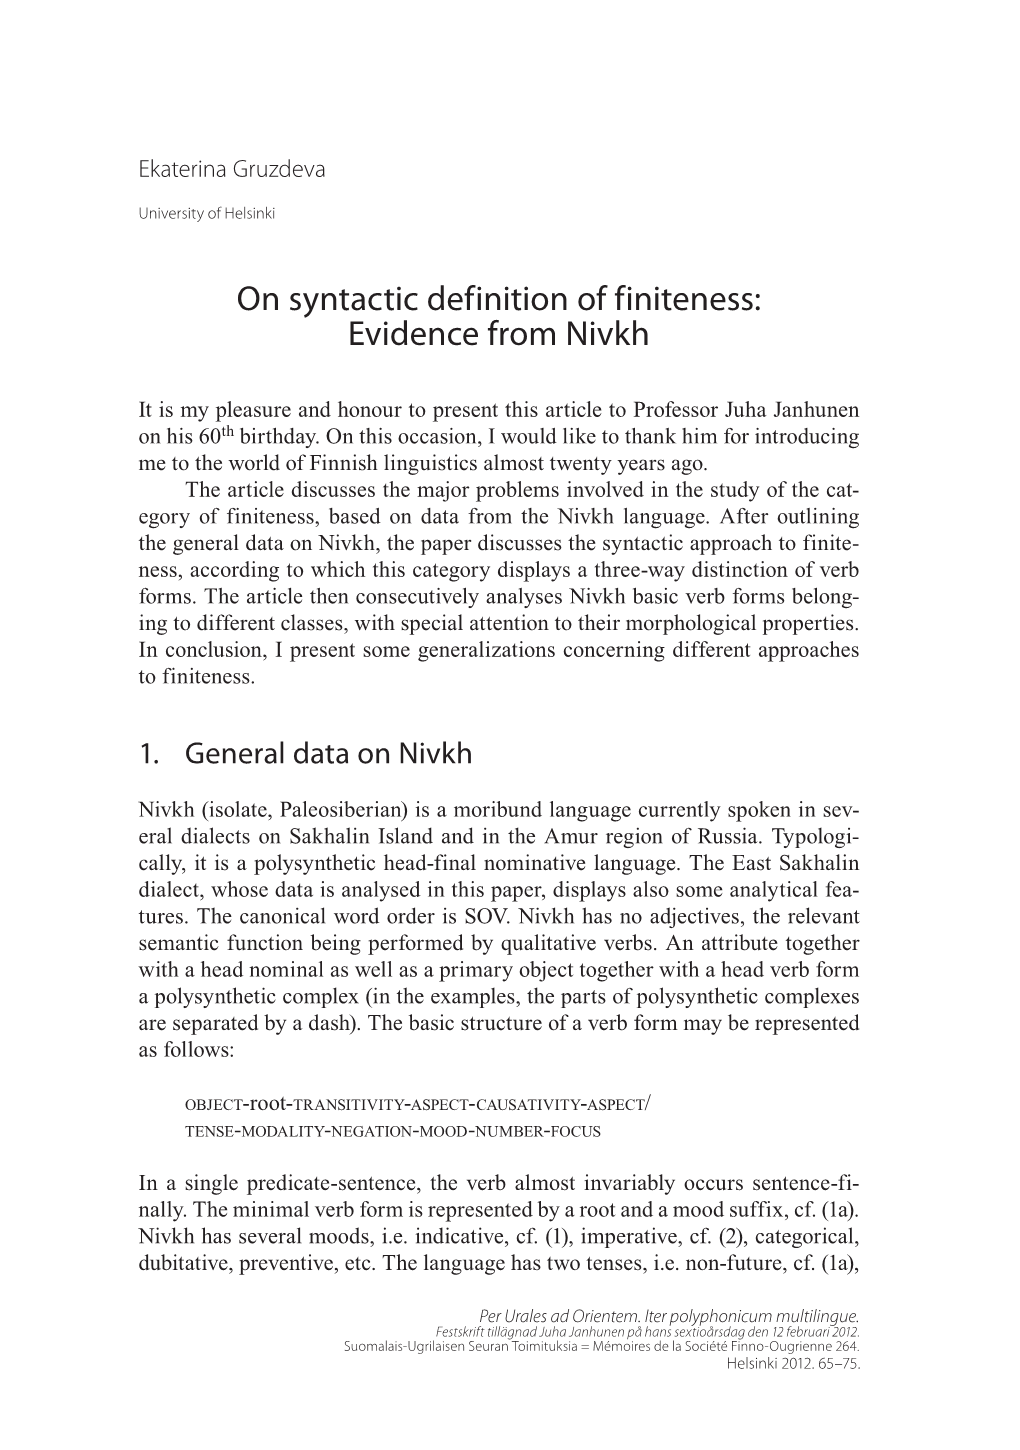 On Syntactic Definition of Finiteness: Evidence from Nivkh